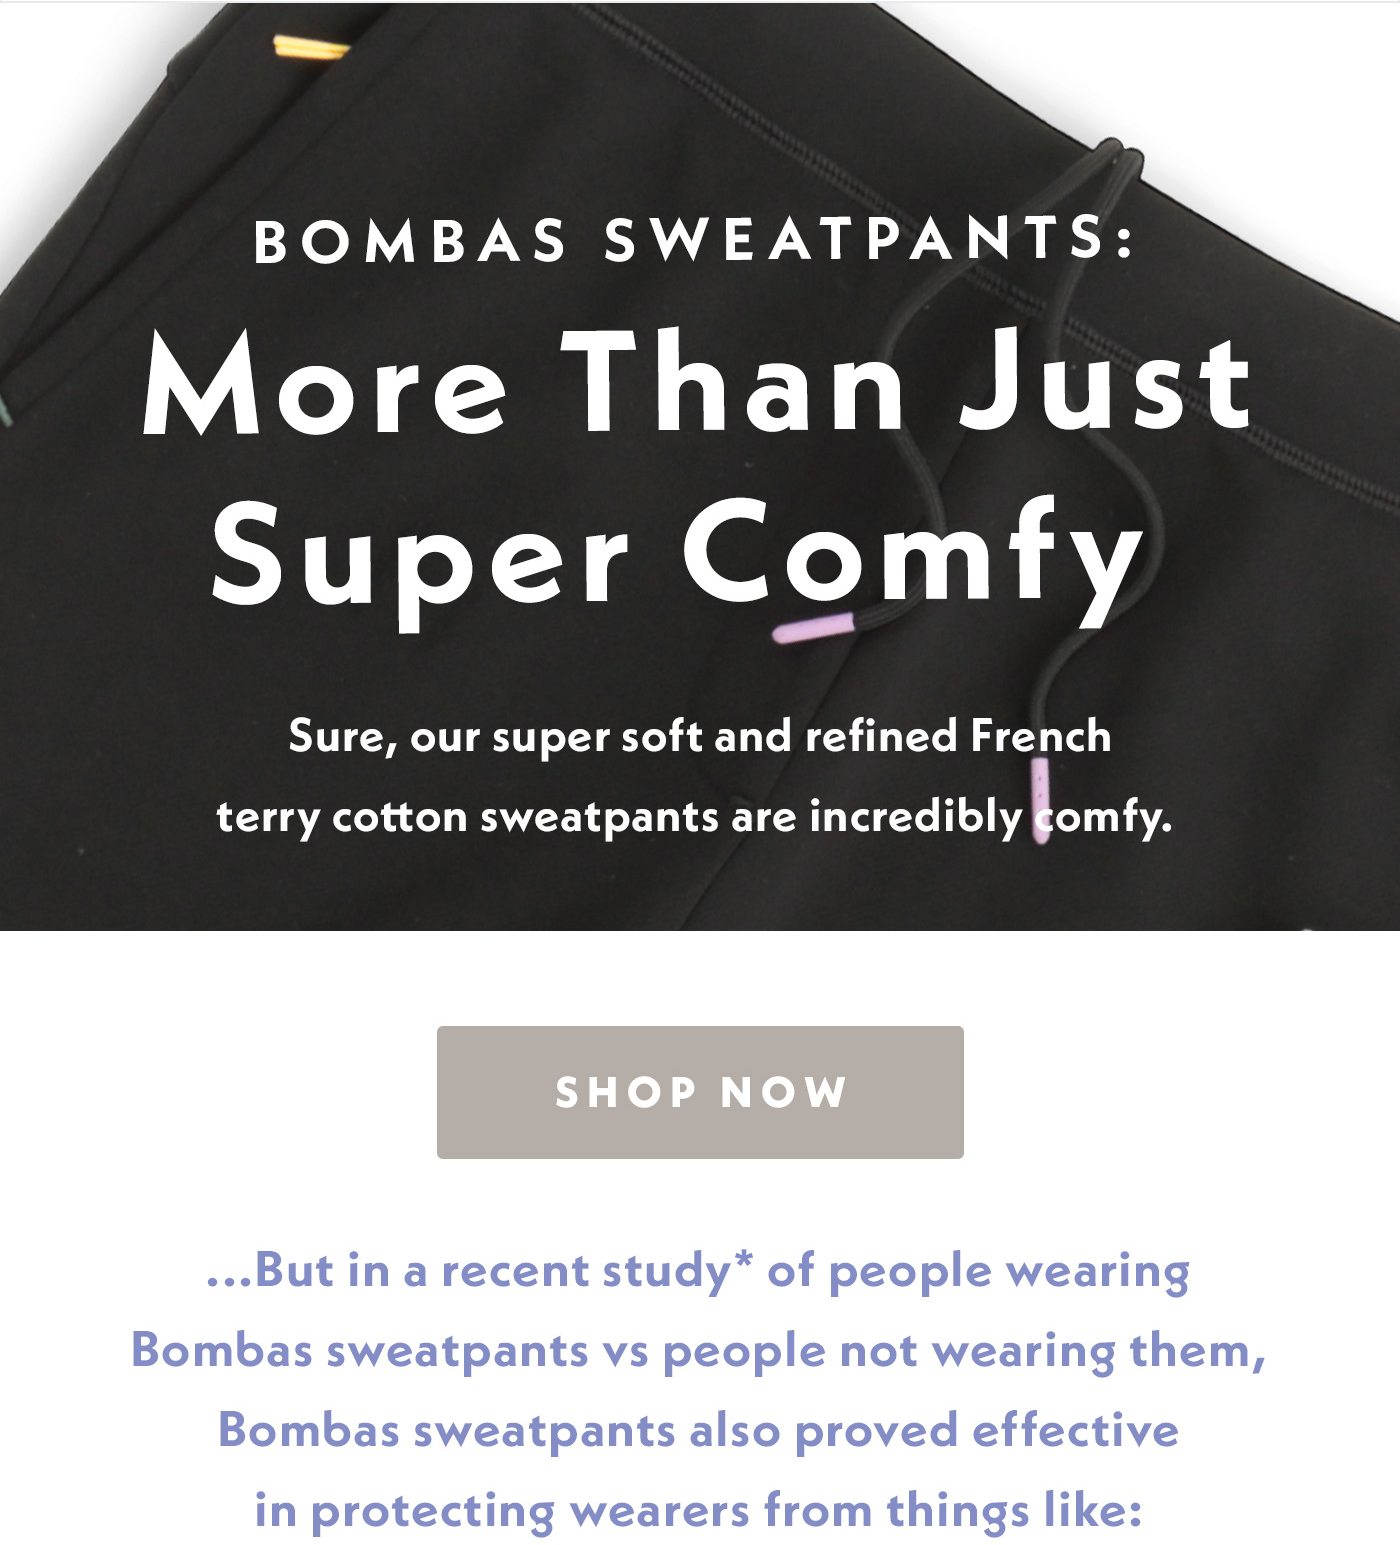 Bombas sweatpants: More Than Just Super Comfy. Sure, our super soft and refined French terry cotton sweatpants are incredibly comfy. But in a recent study of people wearing Bombas sweatpants vs people not wearing them, Bombas sweatpants also proved effective in protecting wearers from things like: 